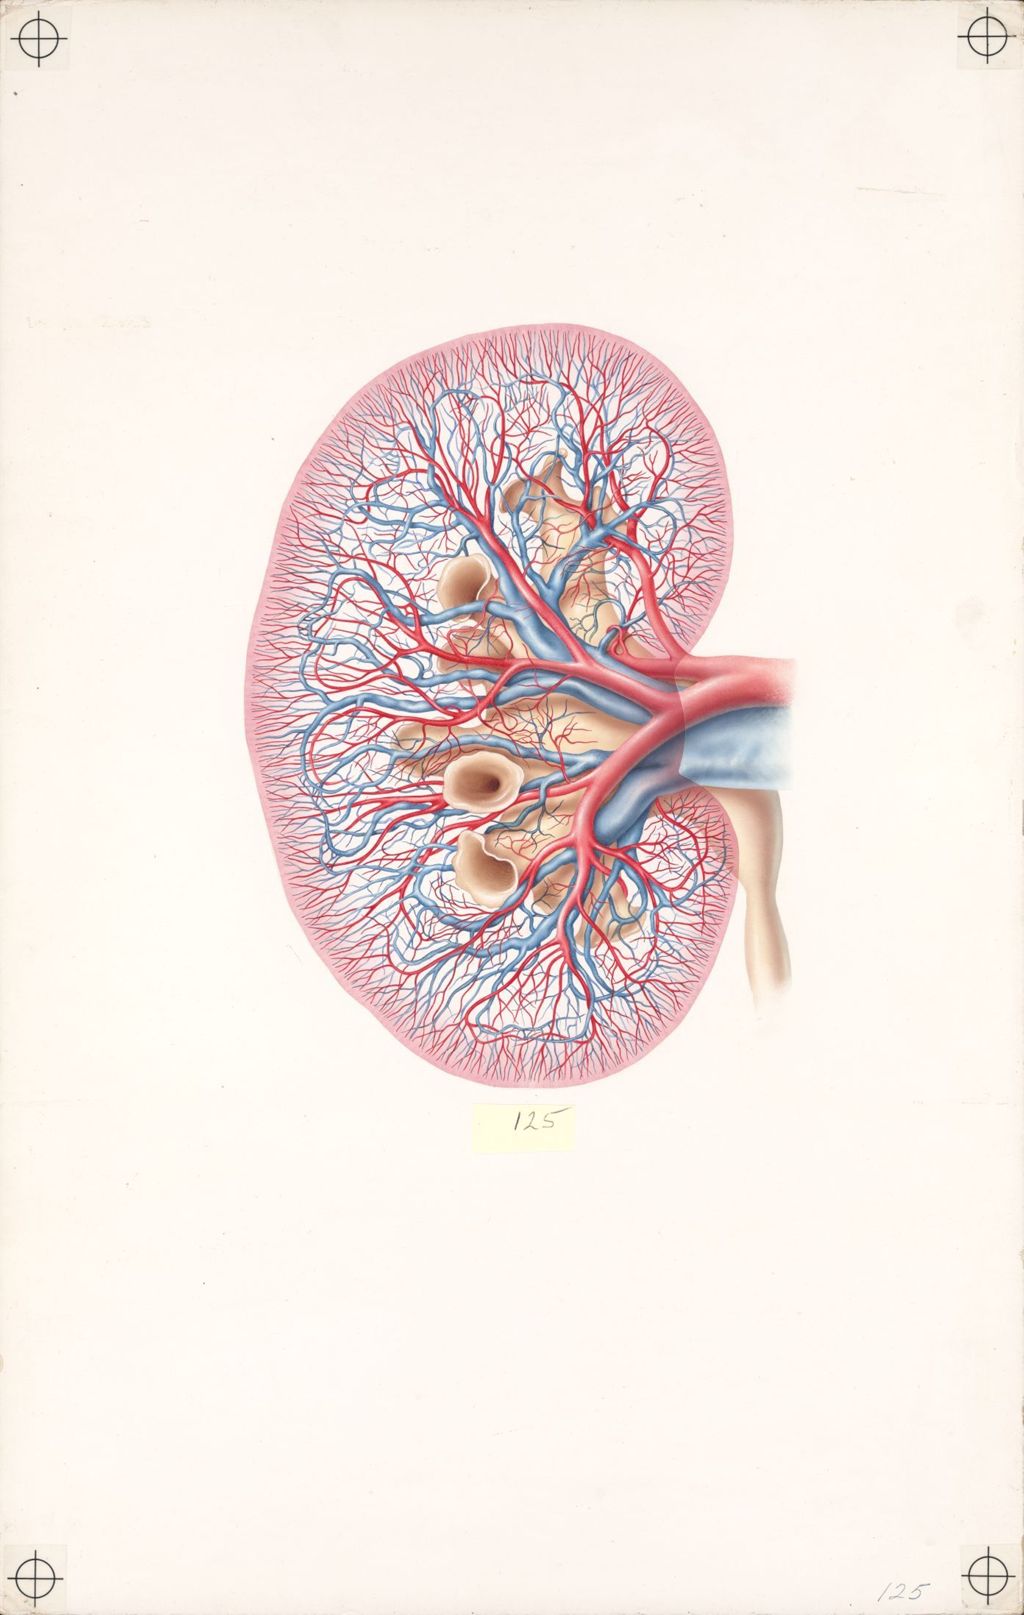 Doctor-Patient Explanatory Atlas of Anatomy, Anatomical Relationships of the Kidneys and Adjacent Organs, Plate II